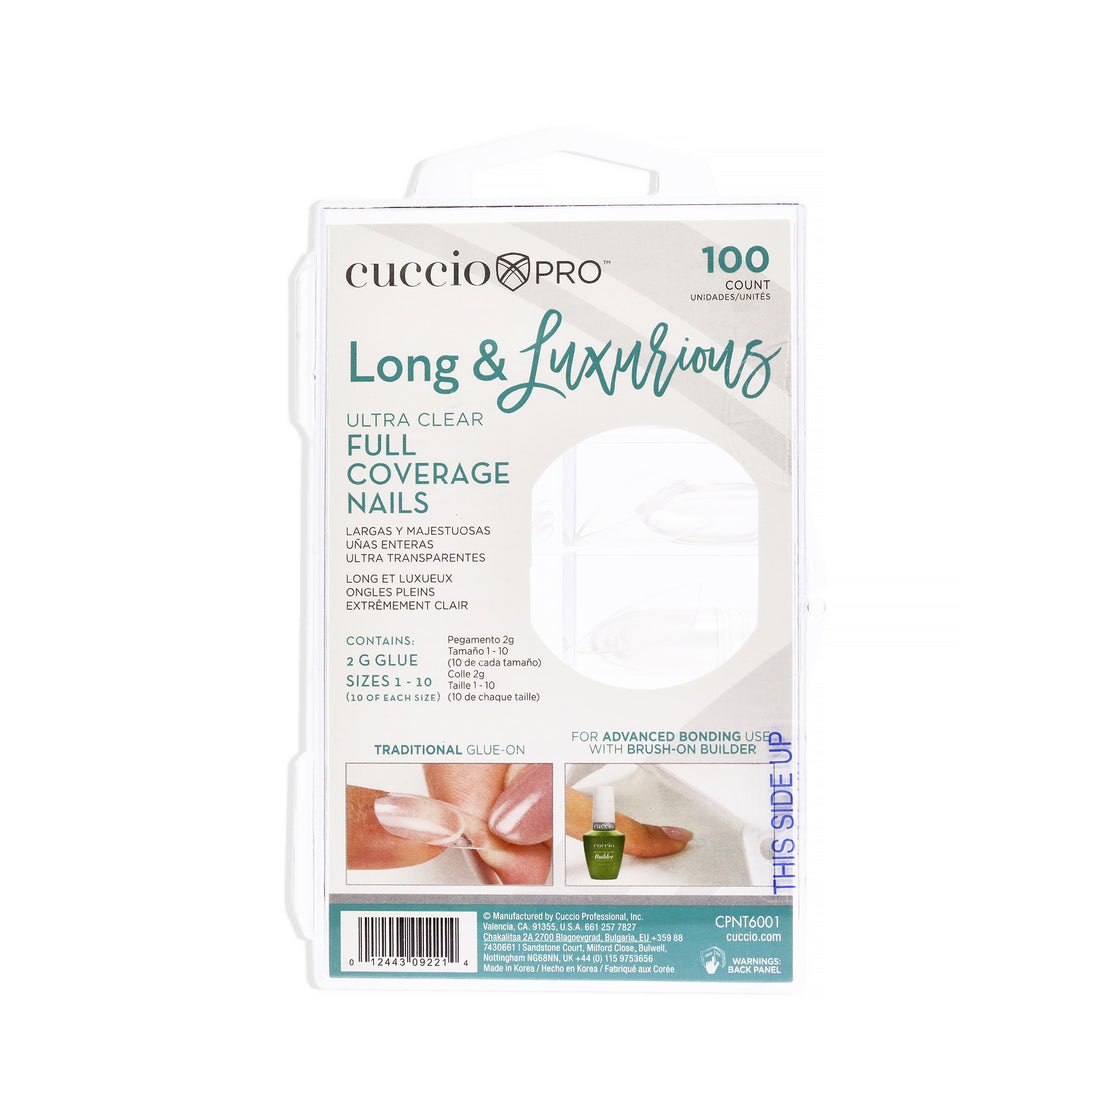 Long and Luxurious Full Coverage Nail Tips - Ultra Clear by Cuccio Pro for Women - 100 Count Nail Tips